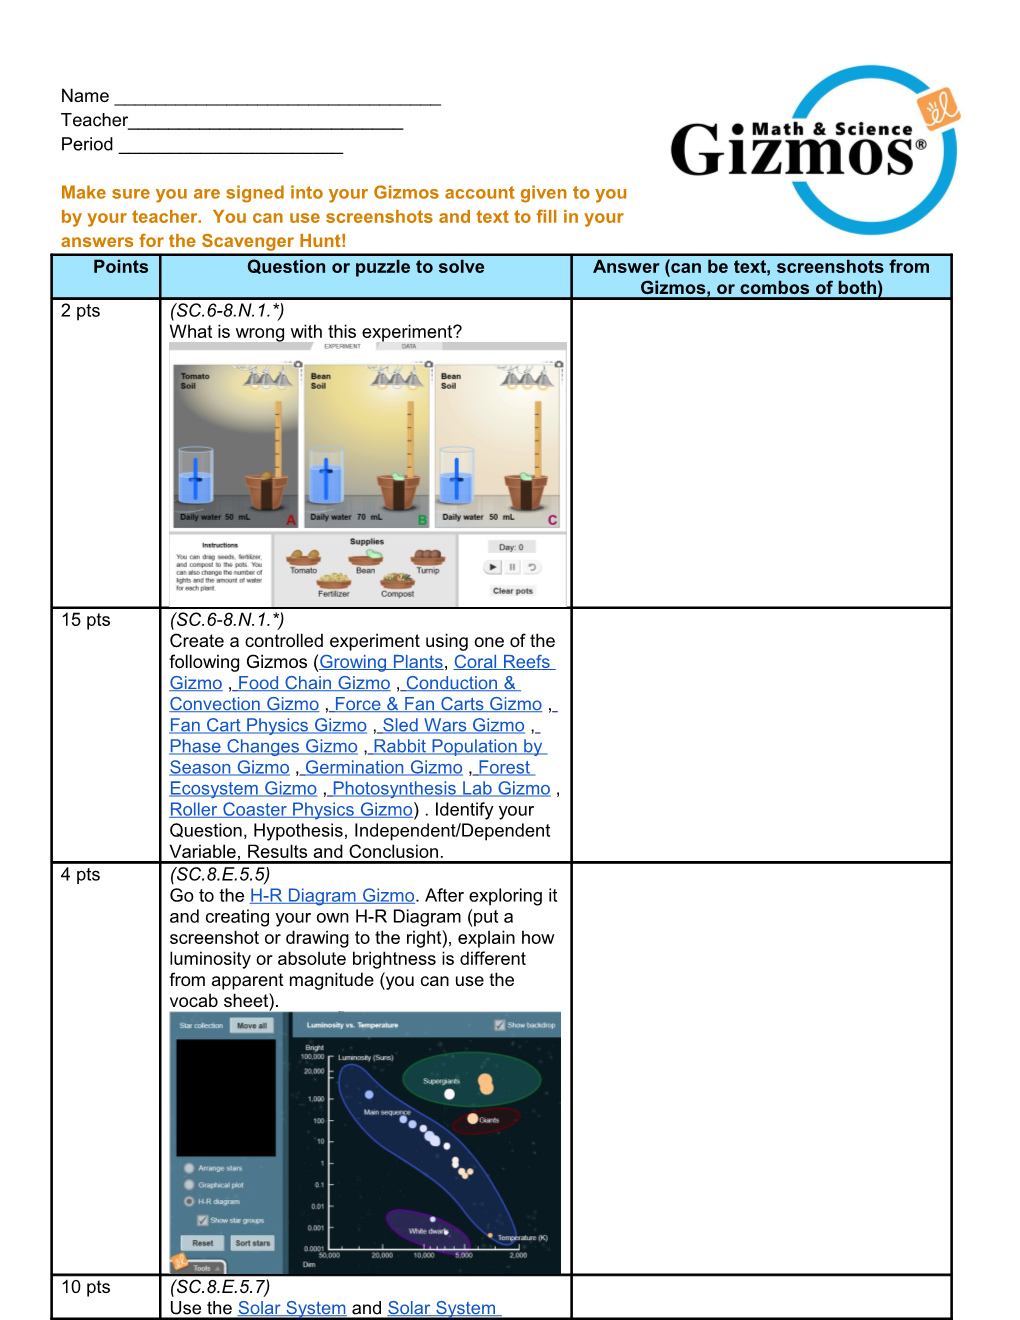 Make Sure You Are Signed Into Your Gizmos Account Given to You by Your Teacher. You Can